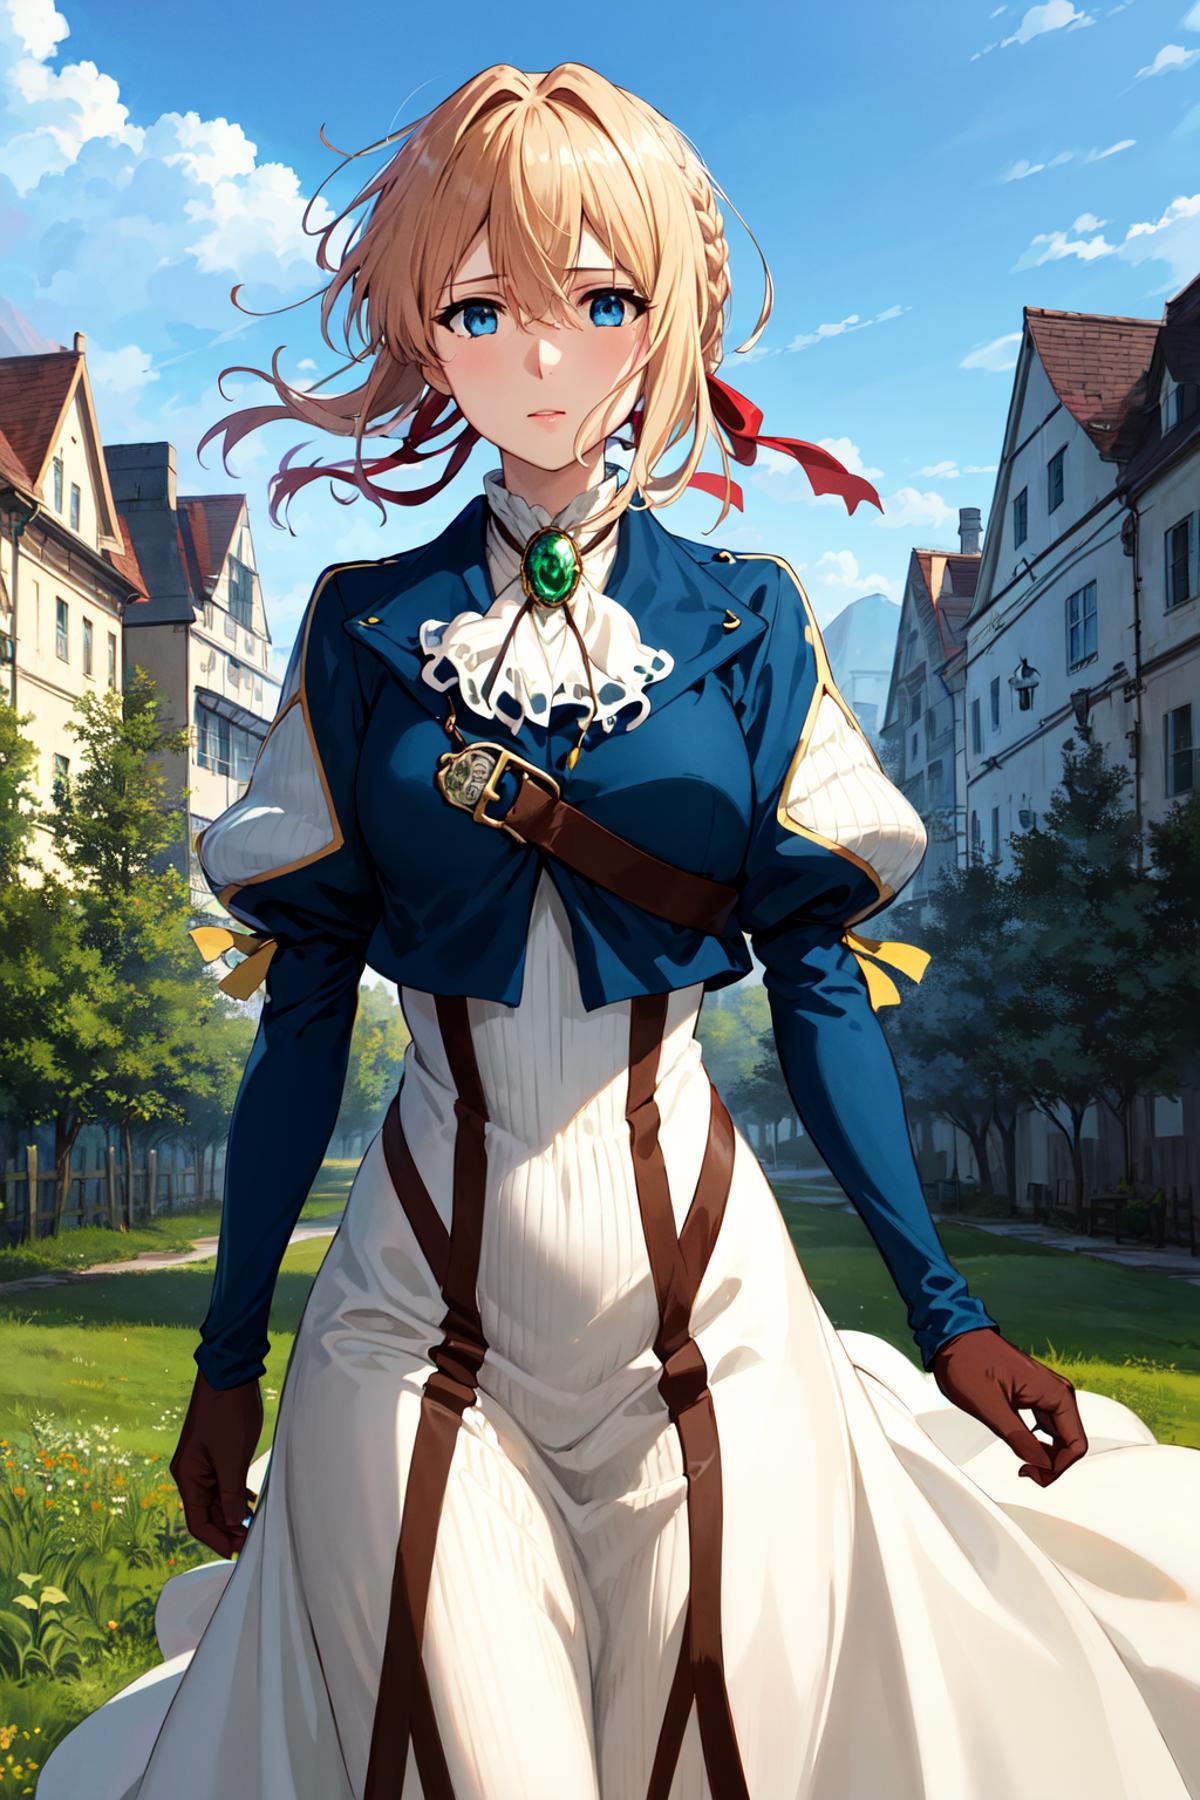 A beautiful blue-haired woman wearing a white and blue dress and a sword belt.